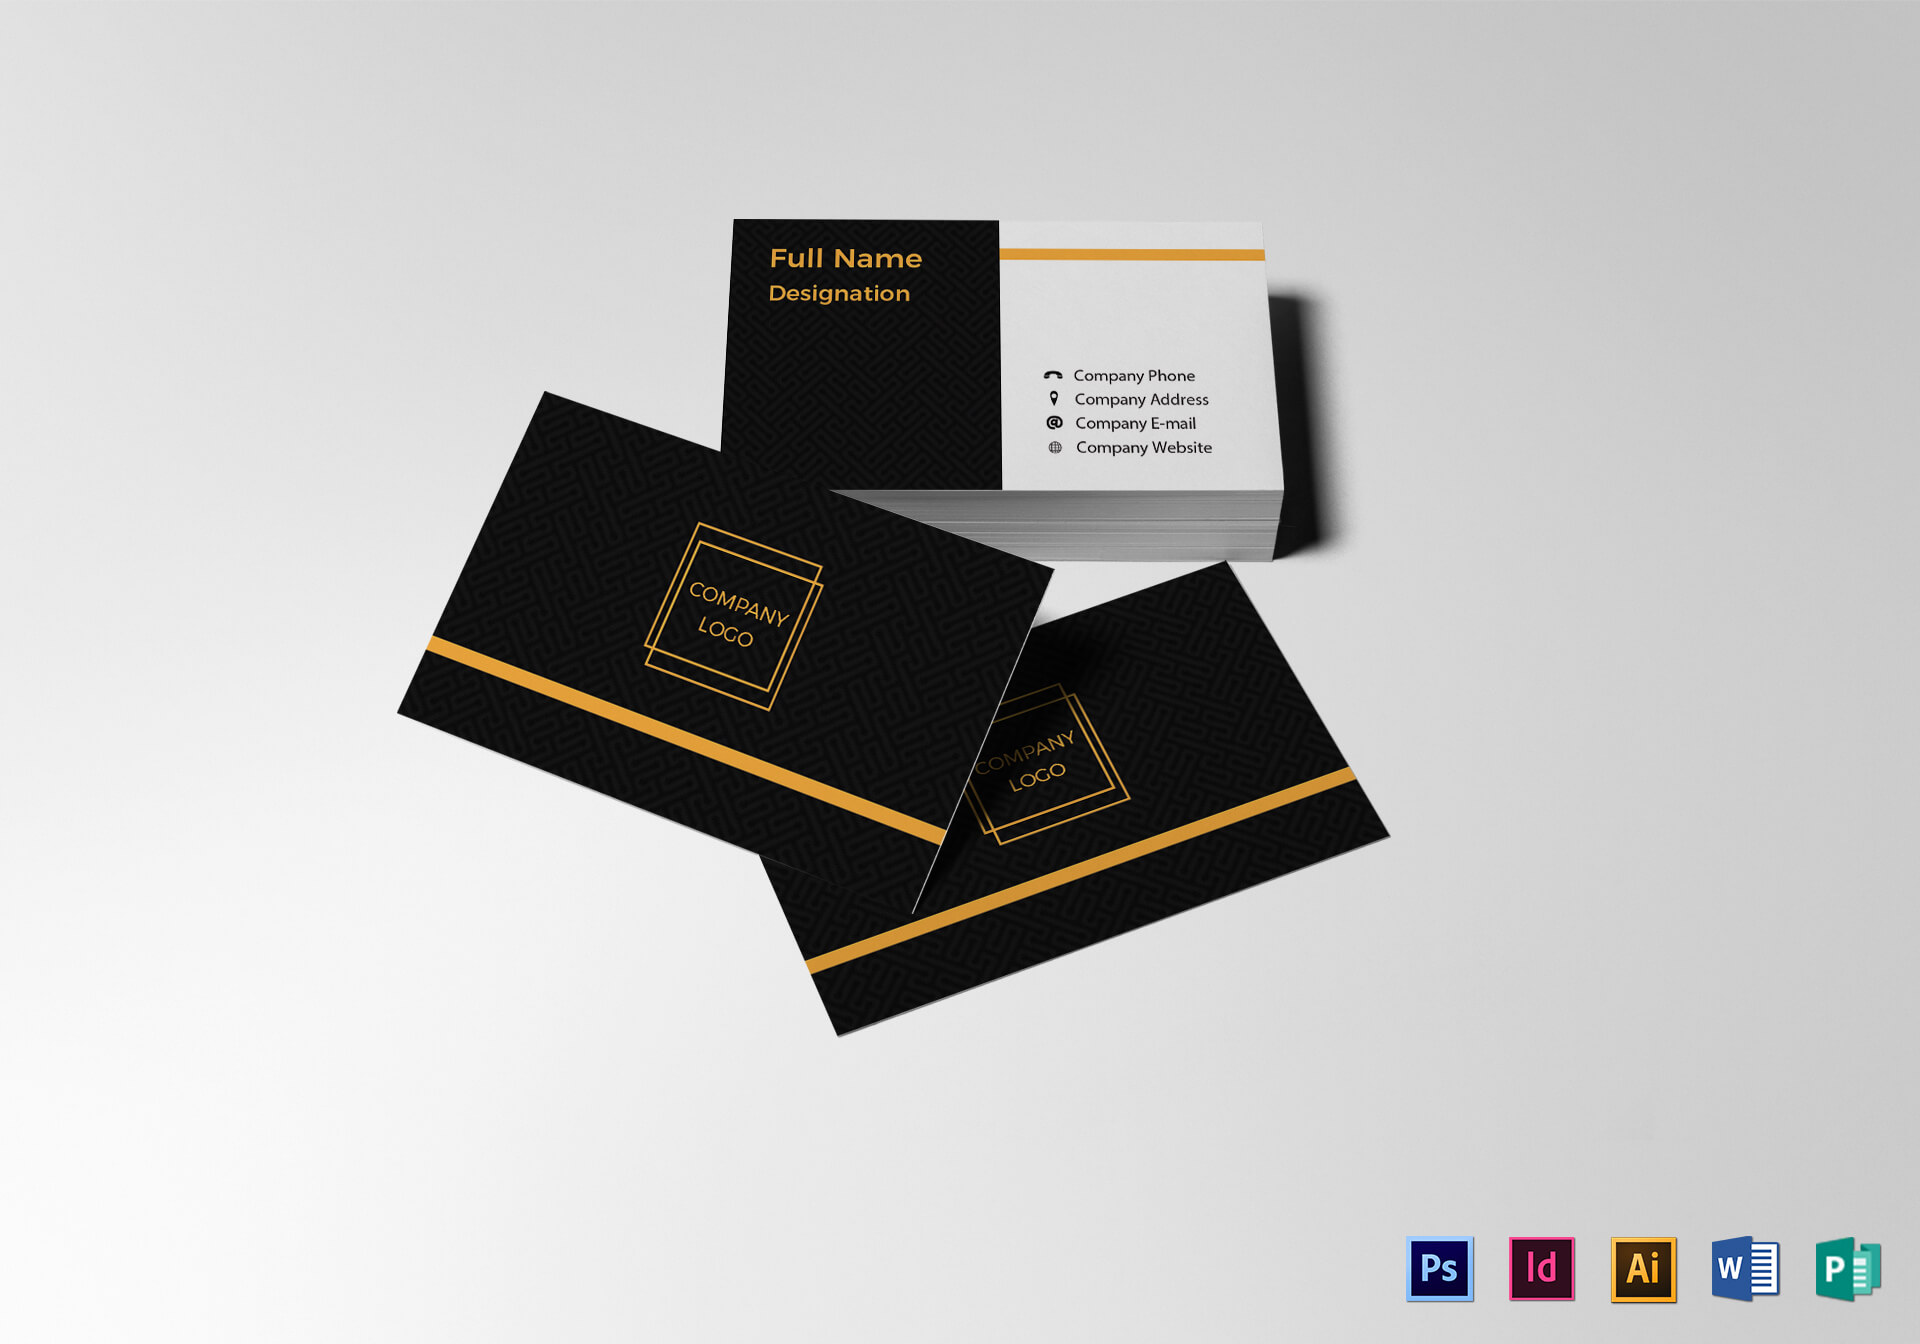 Blank Business Card Template With Regard To Blank Business Card Template Psd